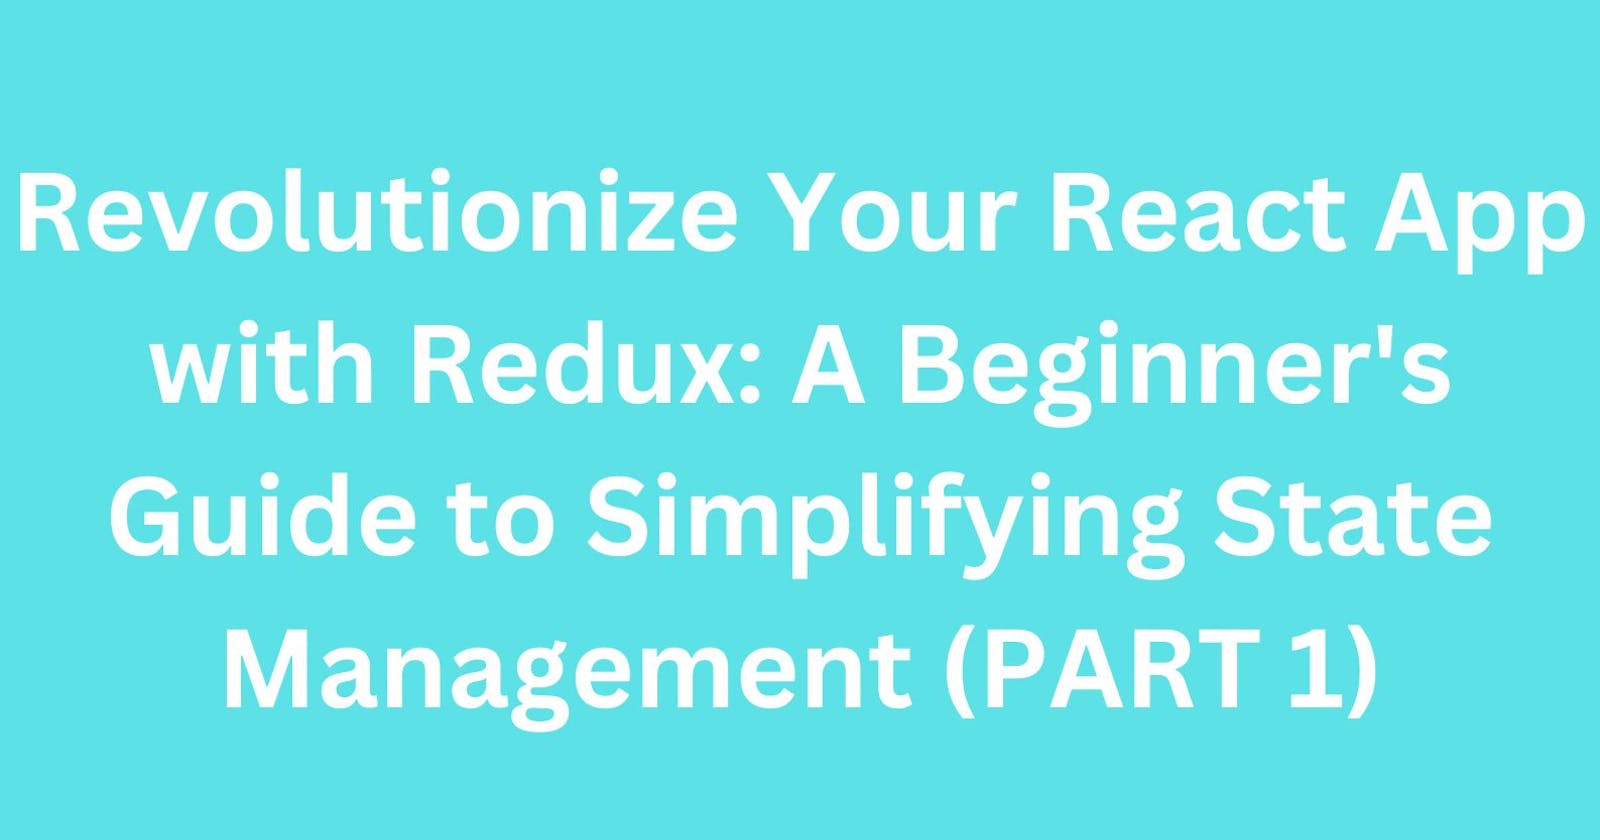 Revolutionize Your React App with Redux: A Beginner's Guide to Simplifying State Management(PART 1)